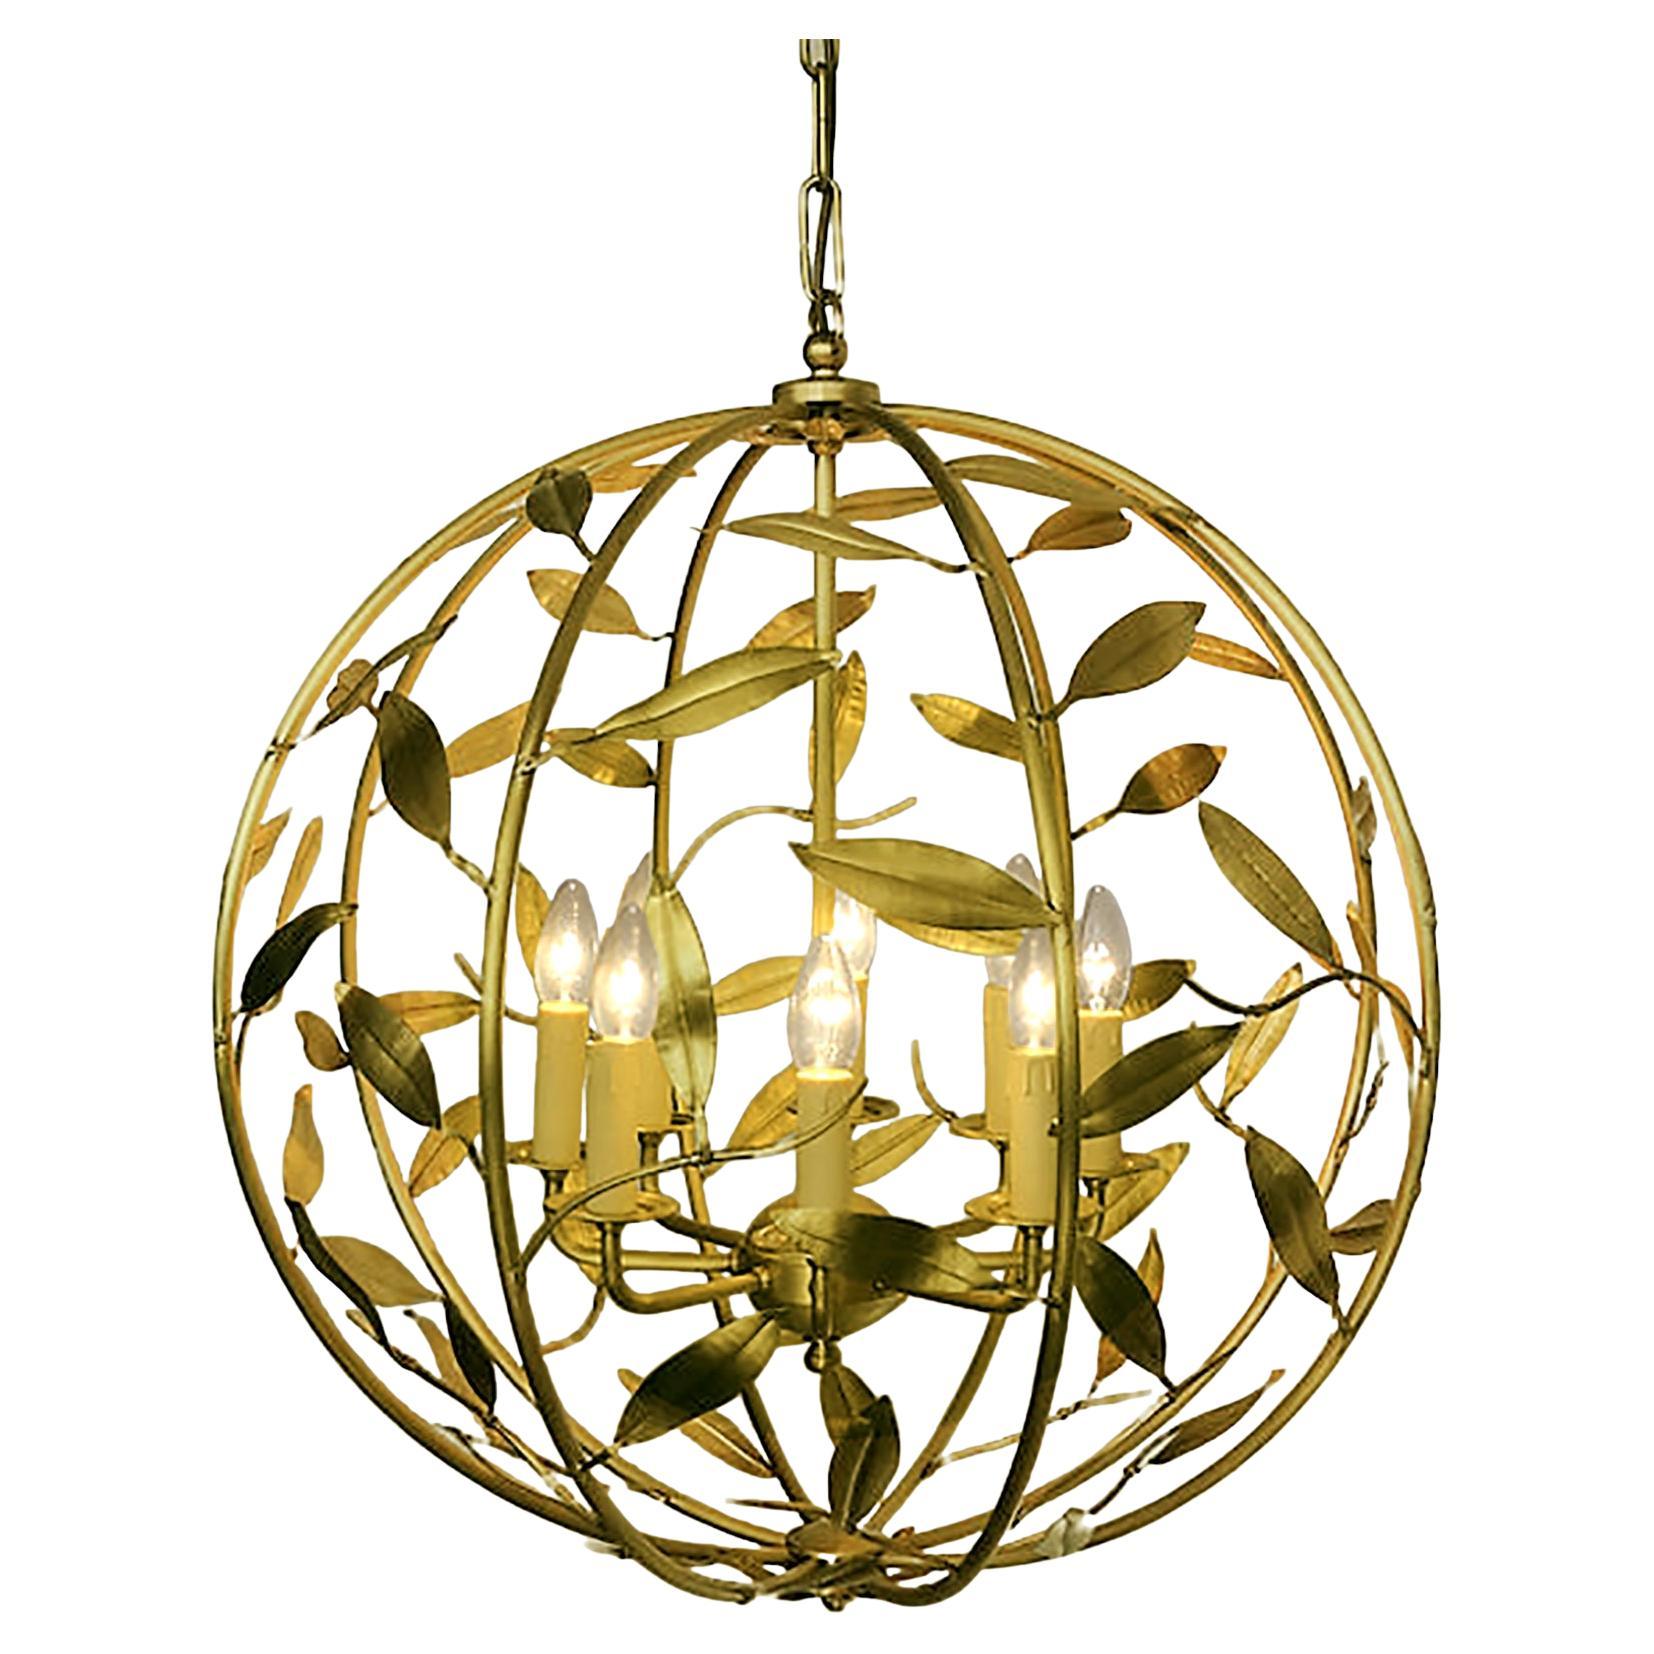 Brass Botanical Foliage Hand-Made Spherical Chandelier For Sale